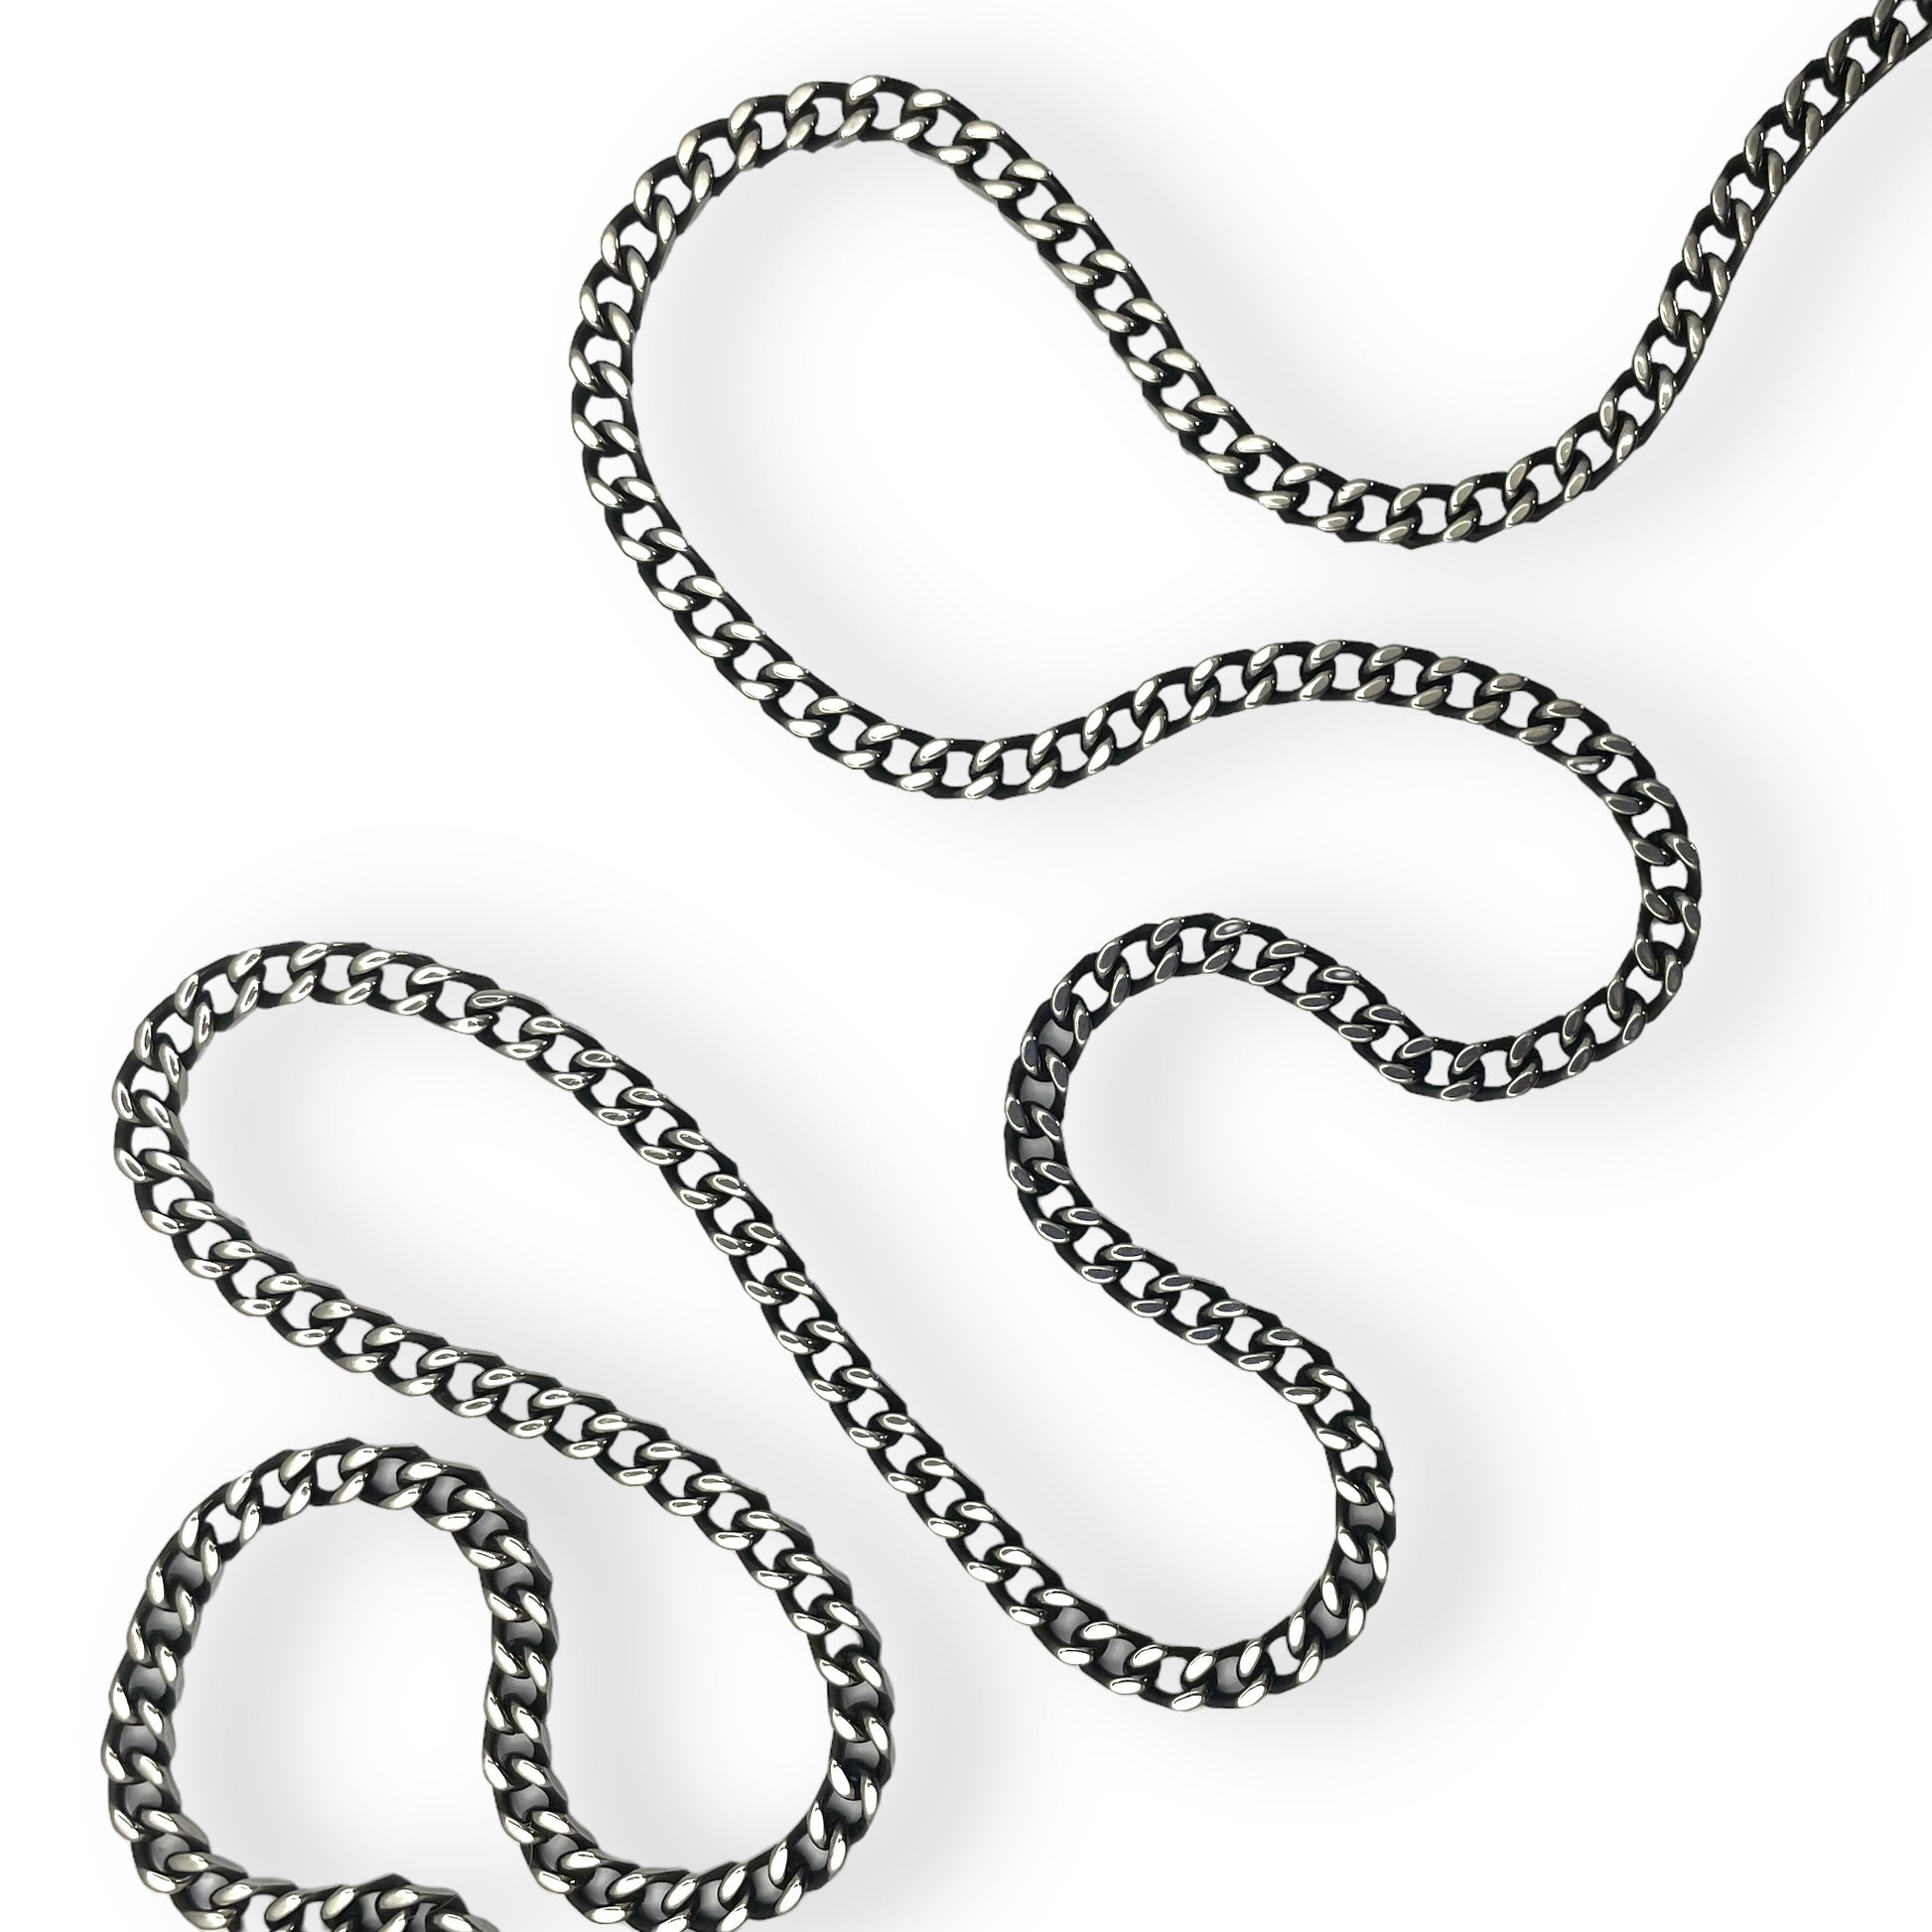 Necklace in Surgical Stainless Steel